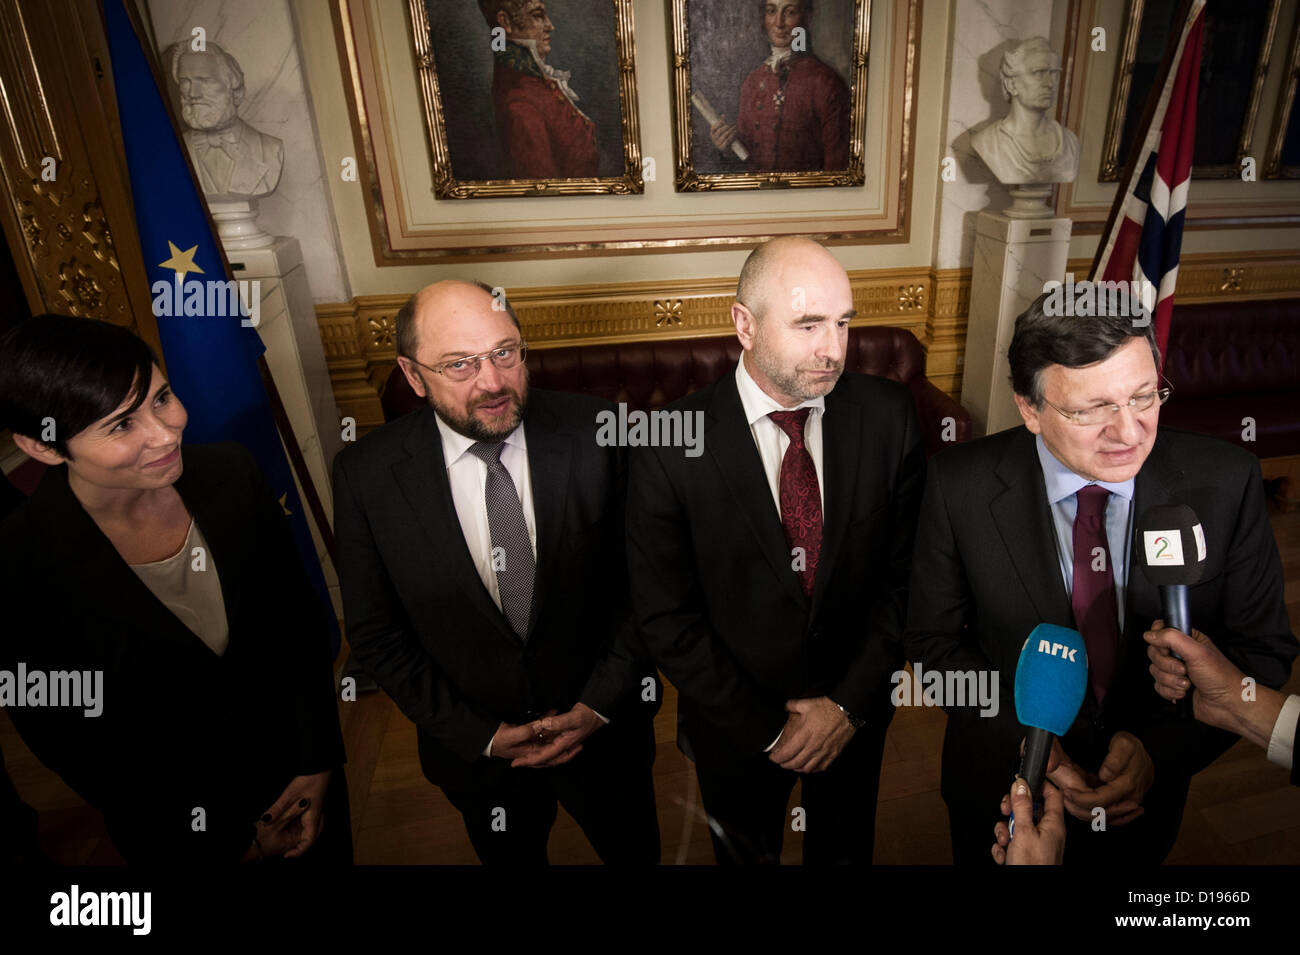 Oslo, Norway. 11/12/2012. Nobel Peace Prize winner Martin Schulz  and Jose Manuel Barrosa meets the press at the Norwegian Parliament along with president of the storting Dag Terje Andersen. Credit:  Alexander Widding / Alamy Live News Stock Photo